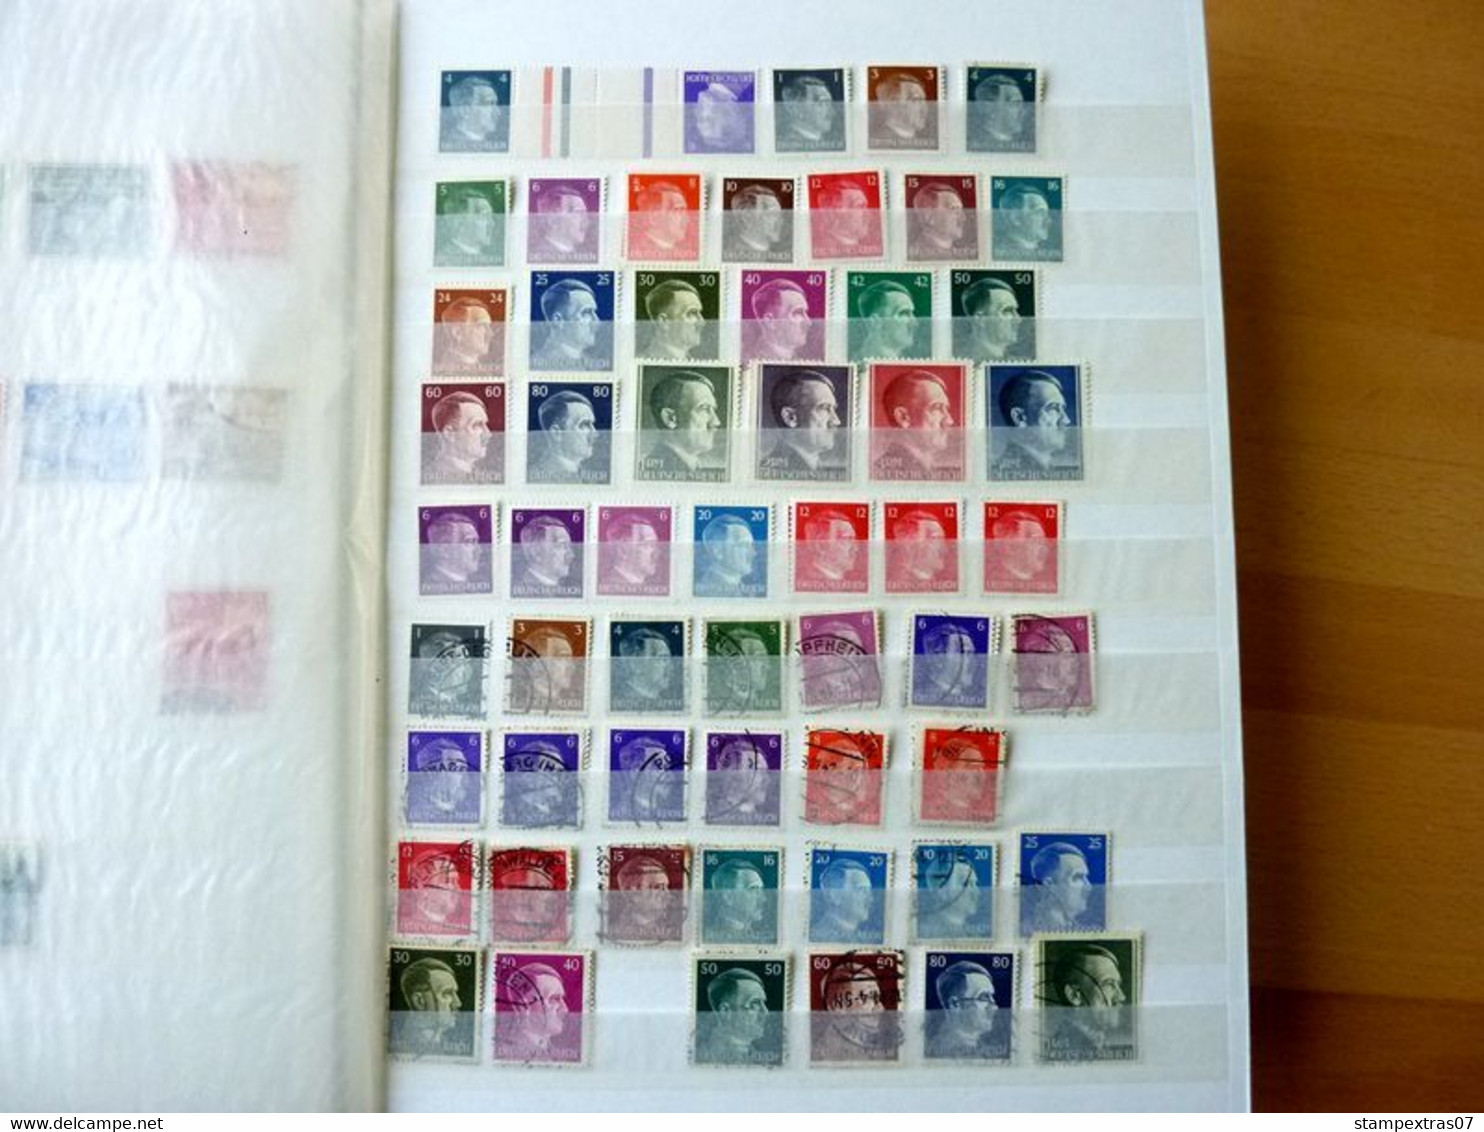 MASSIVE GERMANY STAMP COLLECTION (BRD + REICH + DDR...)